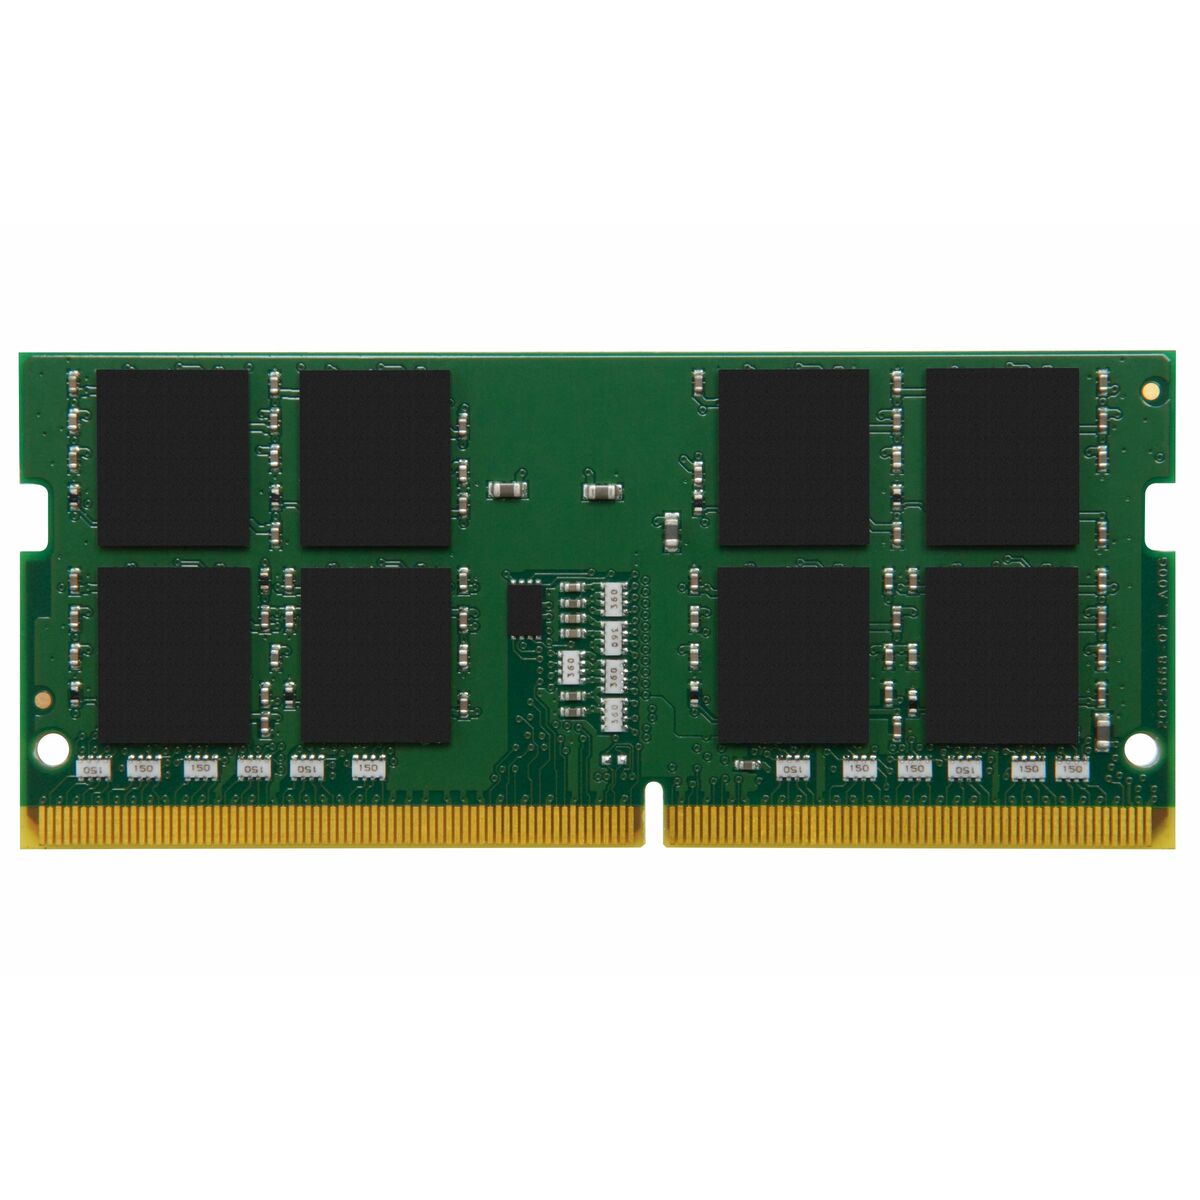 RAM Memory Kingston KVR52S42BD8-32 CL42 32 GB, Kingston, Computing, Components, ram-memory-kingston-kvr52s42bd8-32-cl42-32-gb, Brand_Kingston, category-reference-2609, category-reference-2803, category-reference-2807, category-reference-t-19685, category-reference-t-19912, category-reference-t-21360, computers / components, Condition_NEW, Price_100 - 200, Teleworking, RiotNook